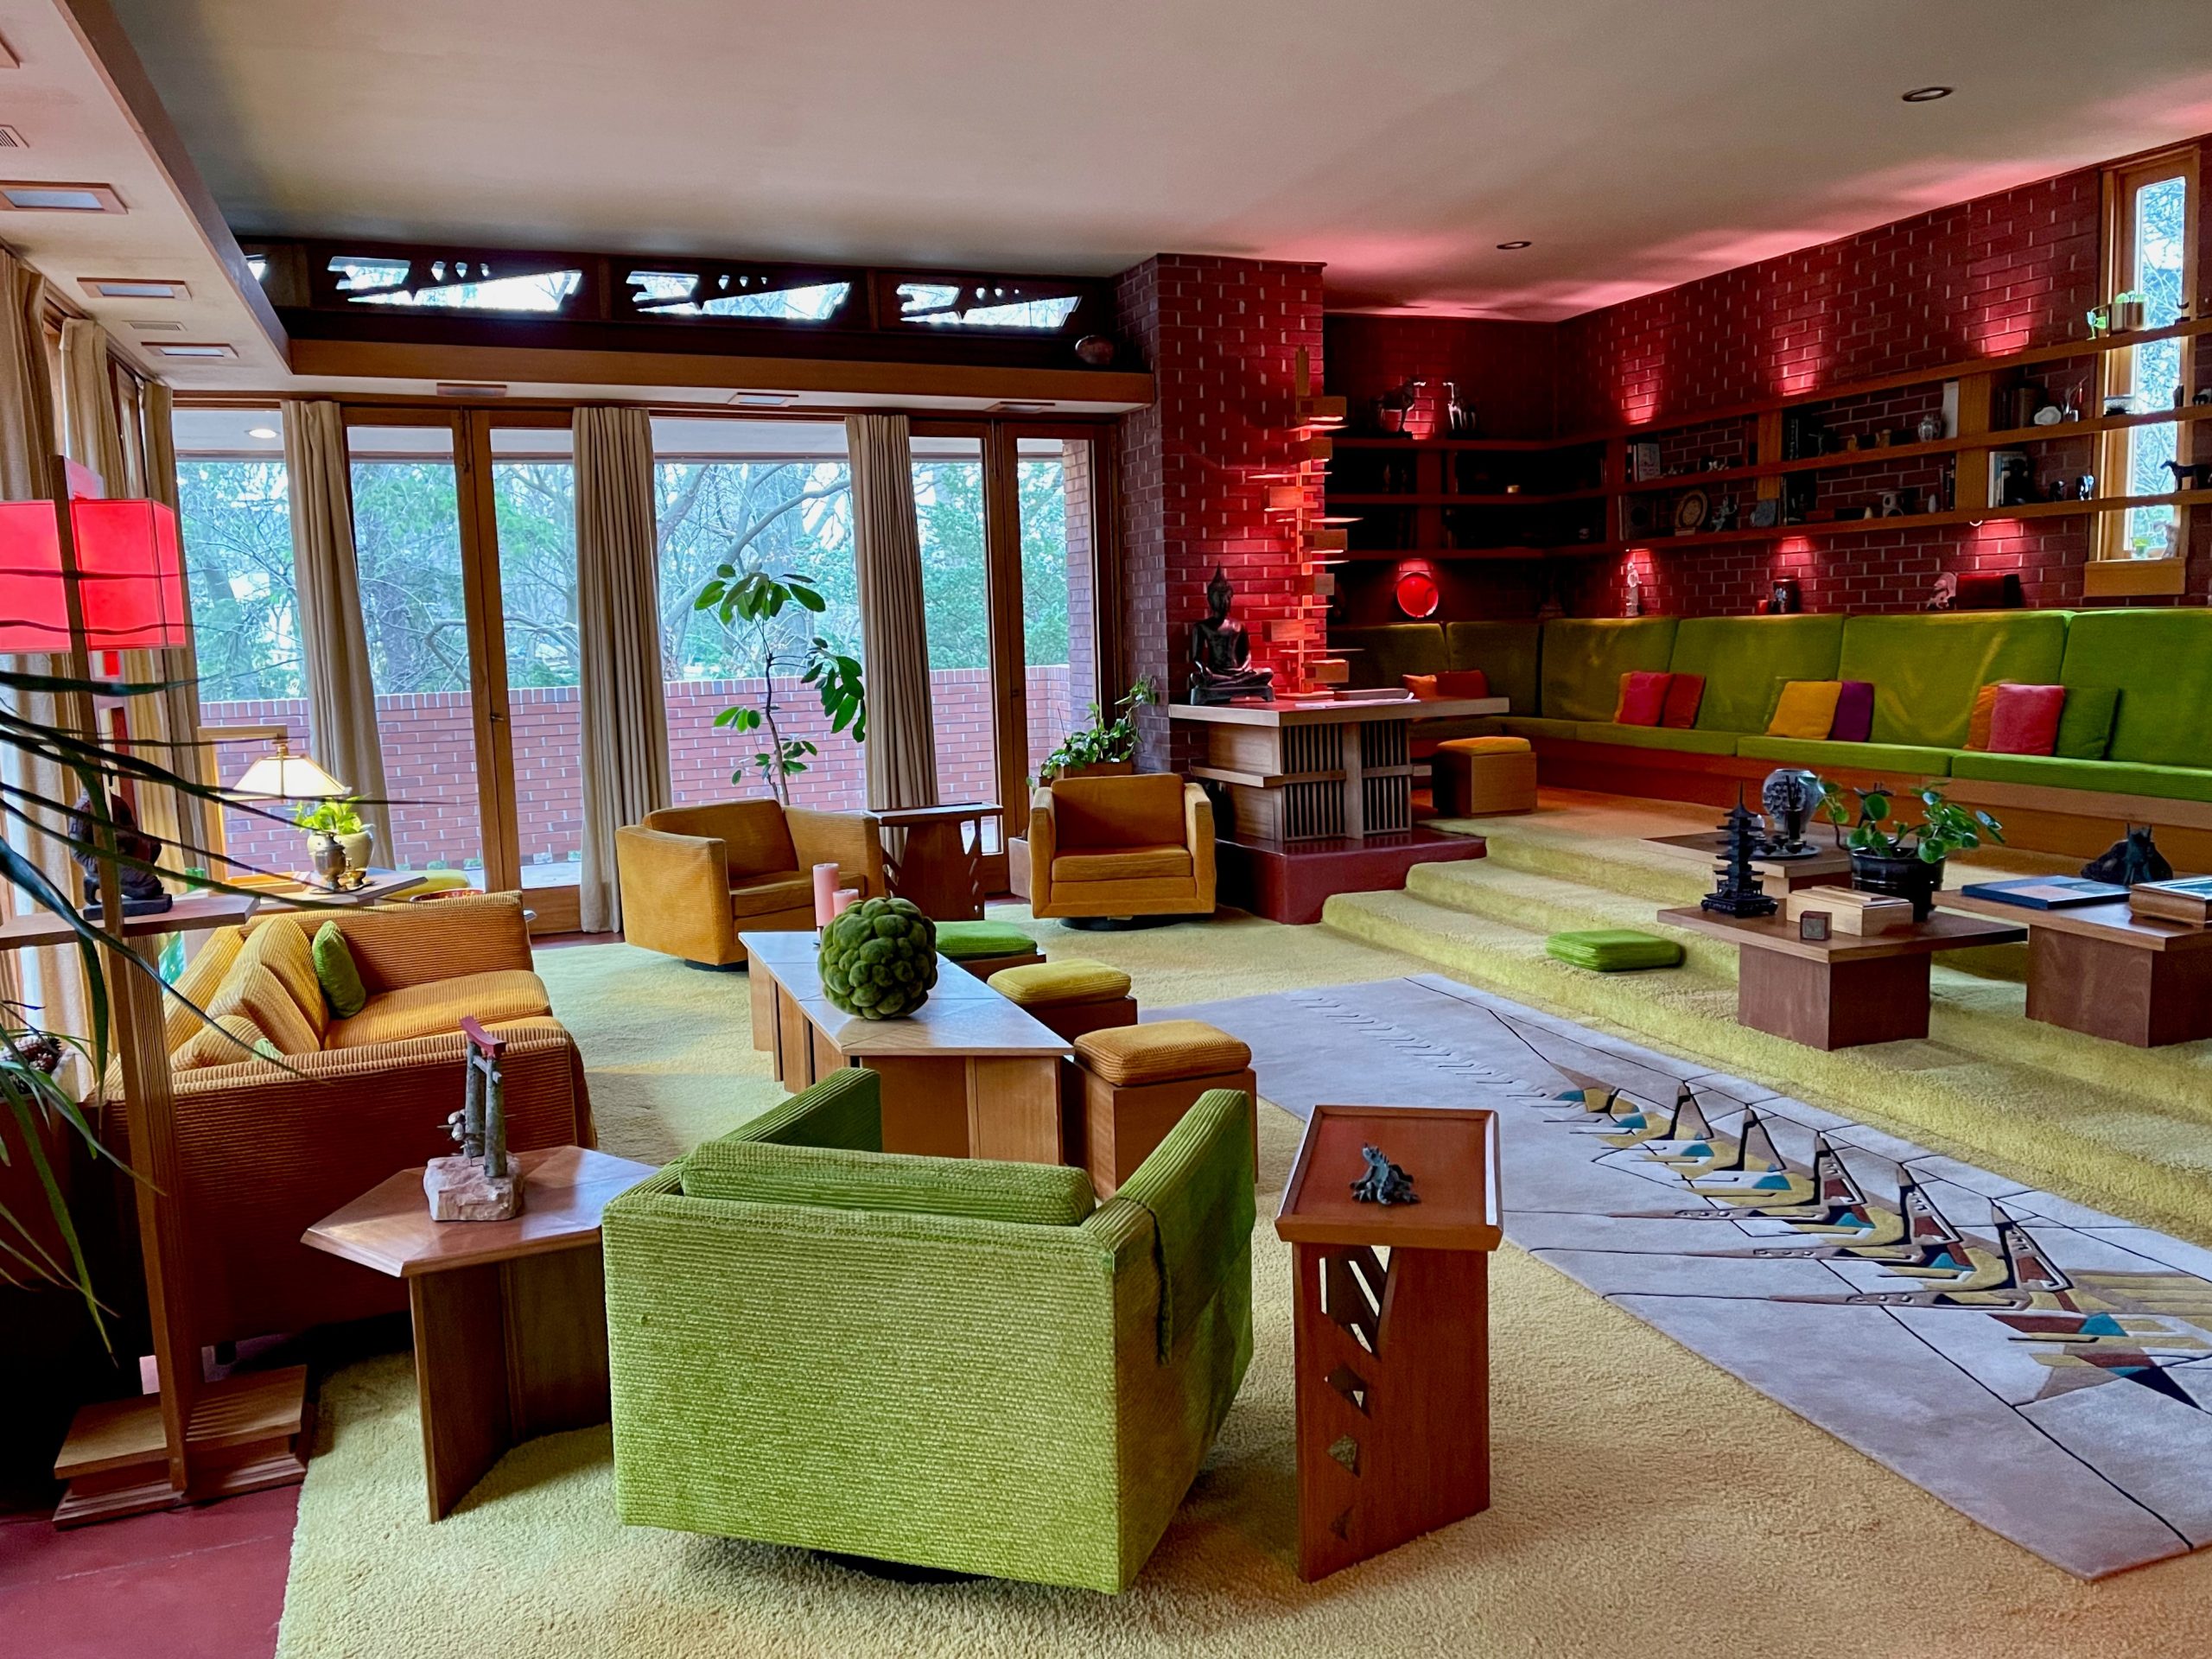 This image shows the interior of Frank Lloyd Wright's Samara House with mid-century modern furniture